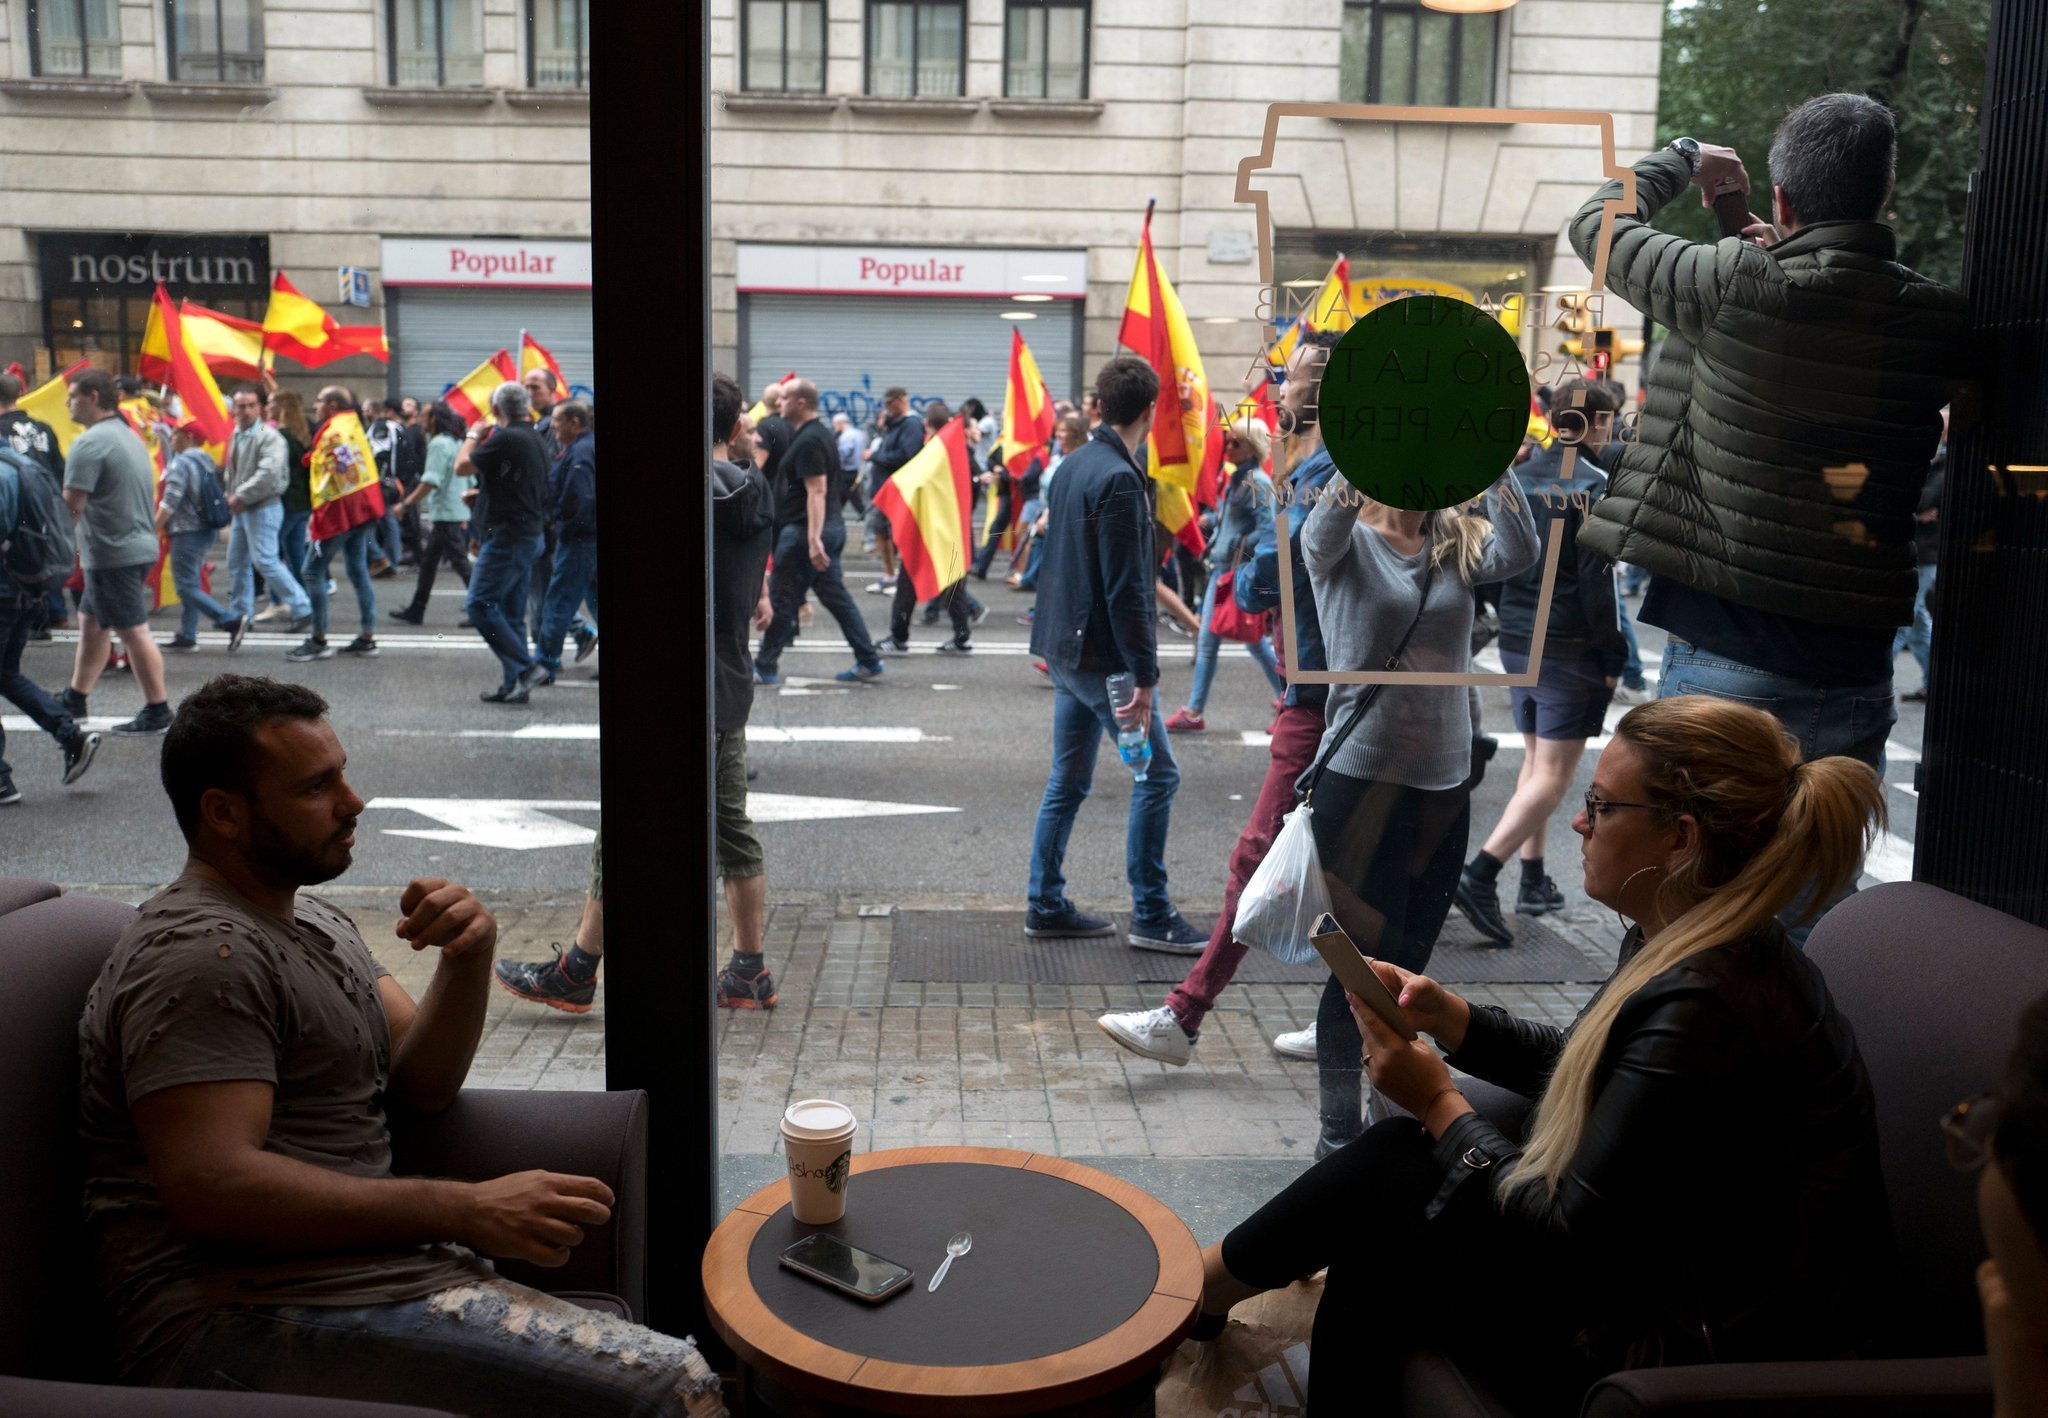 Demonstrators protesting against the Catalonia referendum passed a cafe in Barcelona on Sunday. Credit Jim Hollander/European Pressphoto Agency